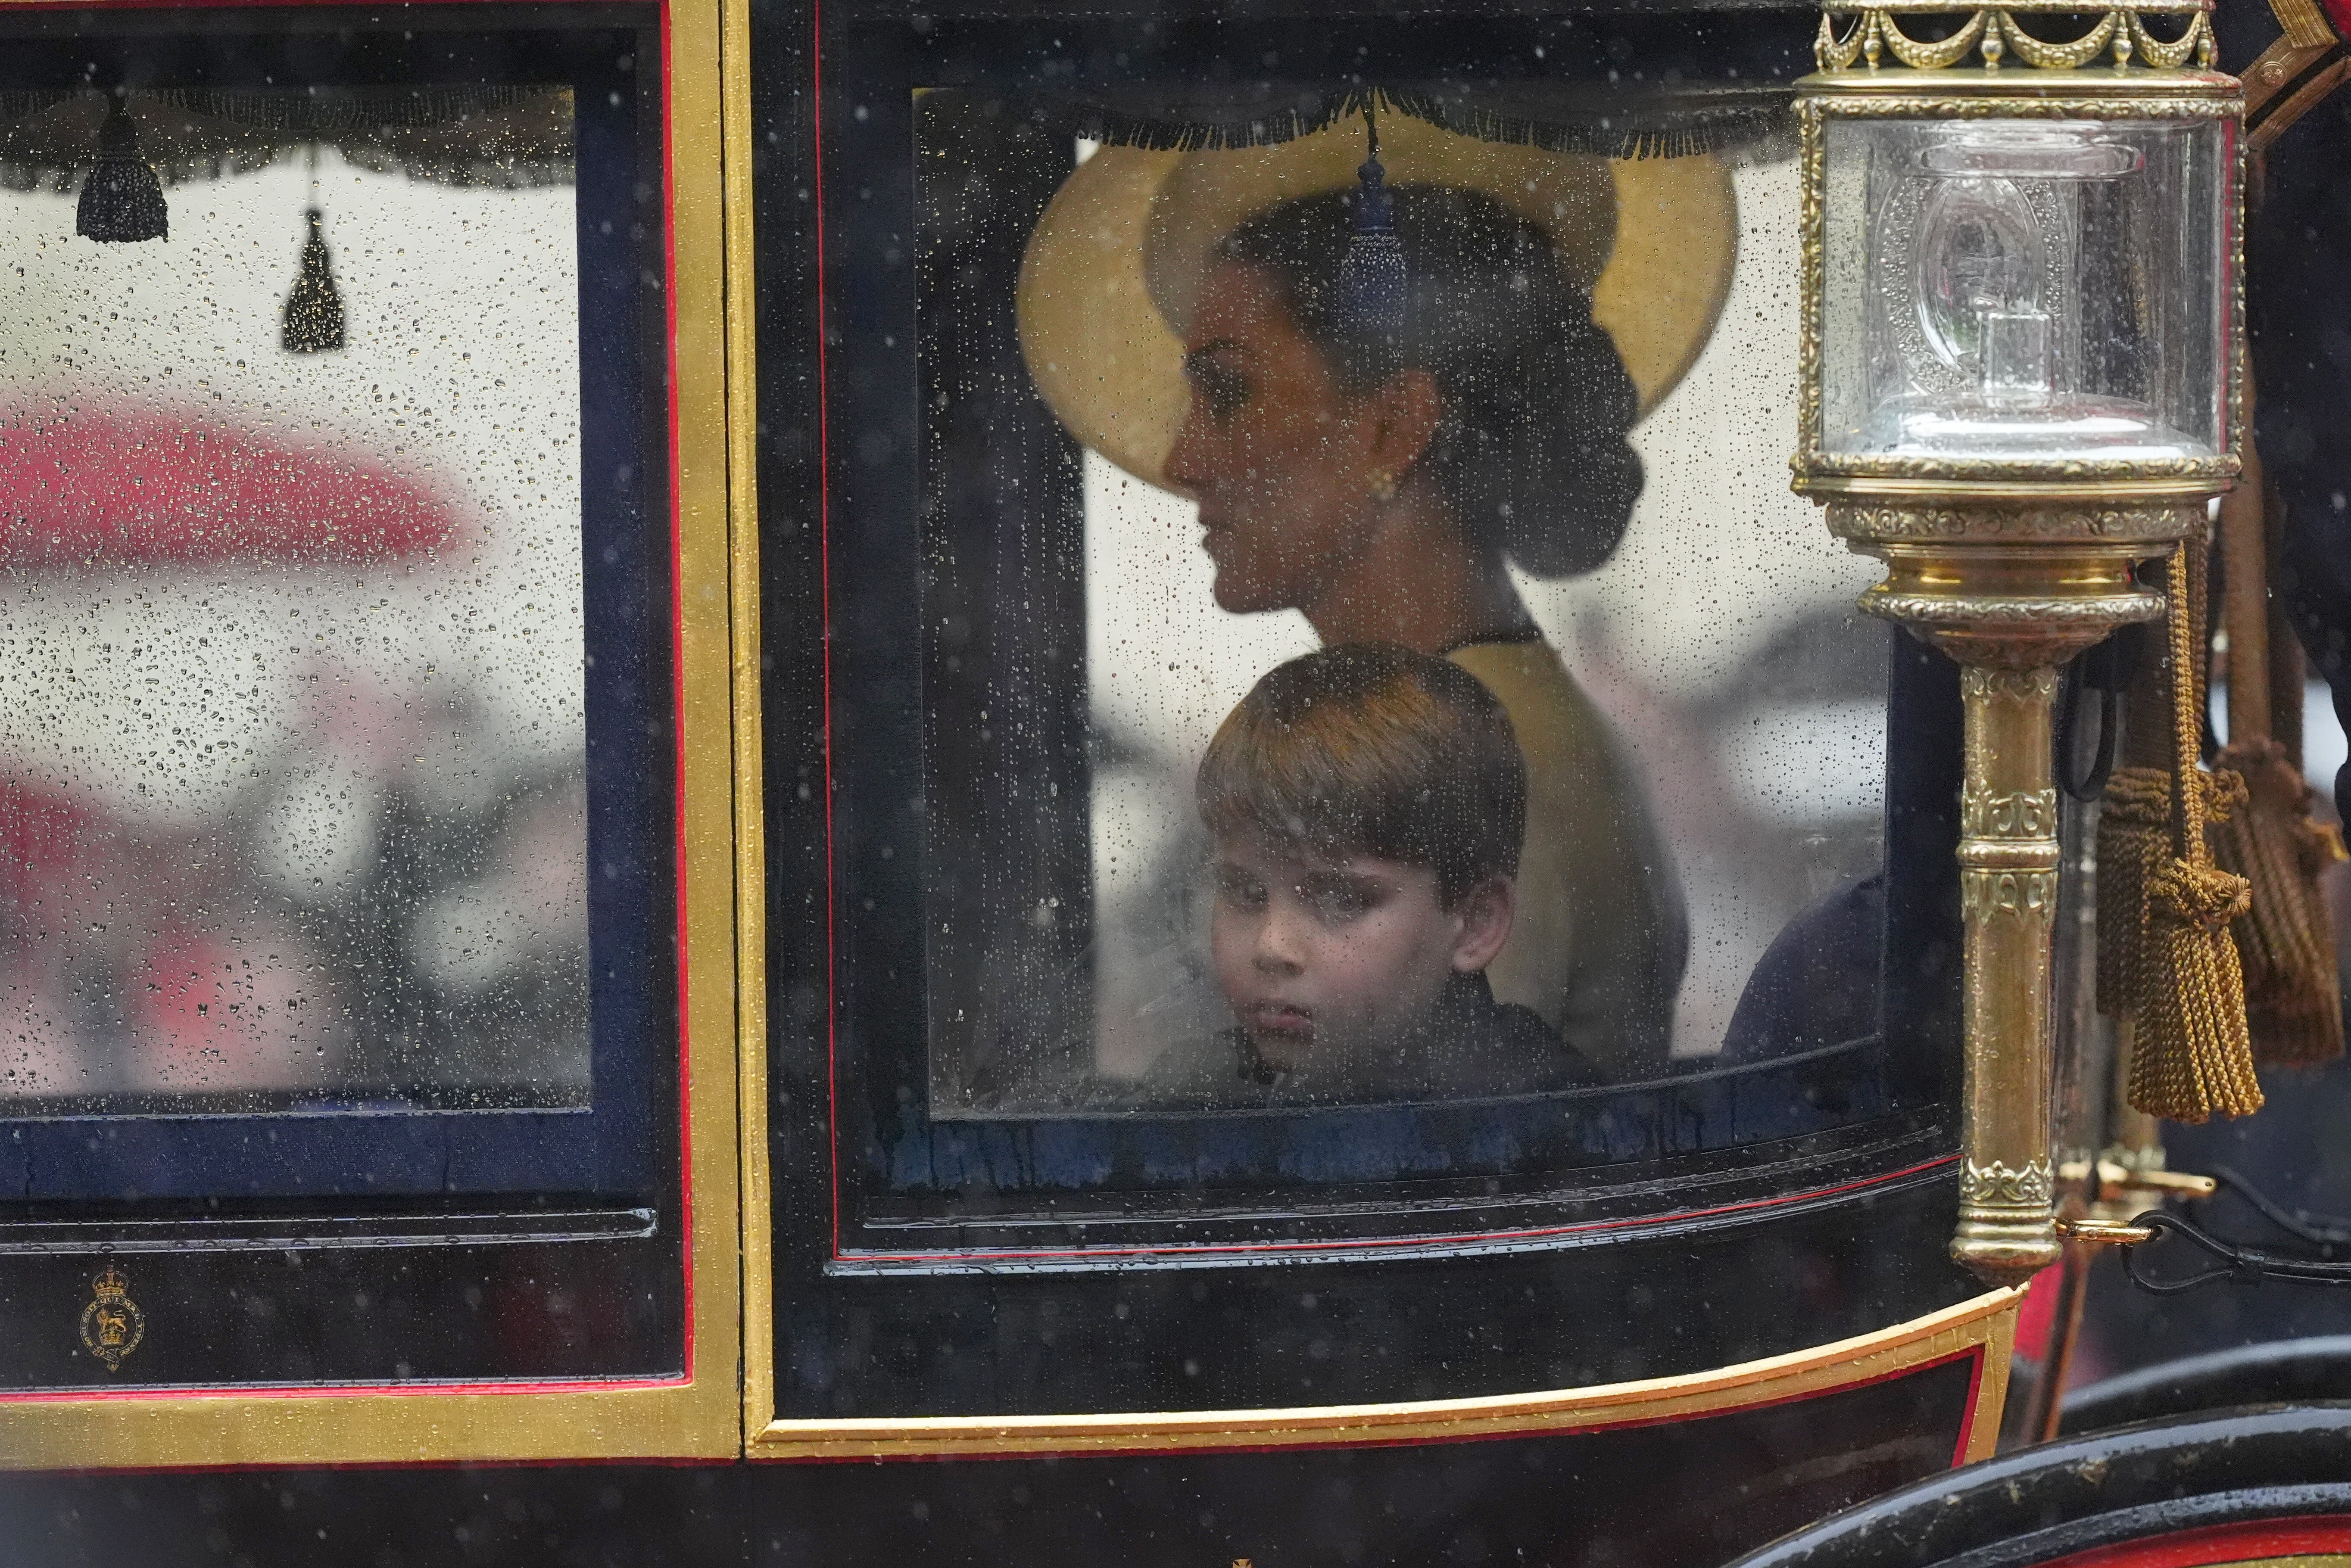 The Princess of Wales and Prince Louis safely in the carriage as they proceed along the rainsoaked Mall